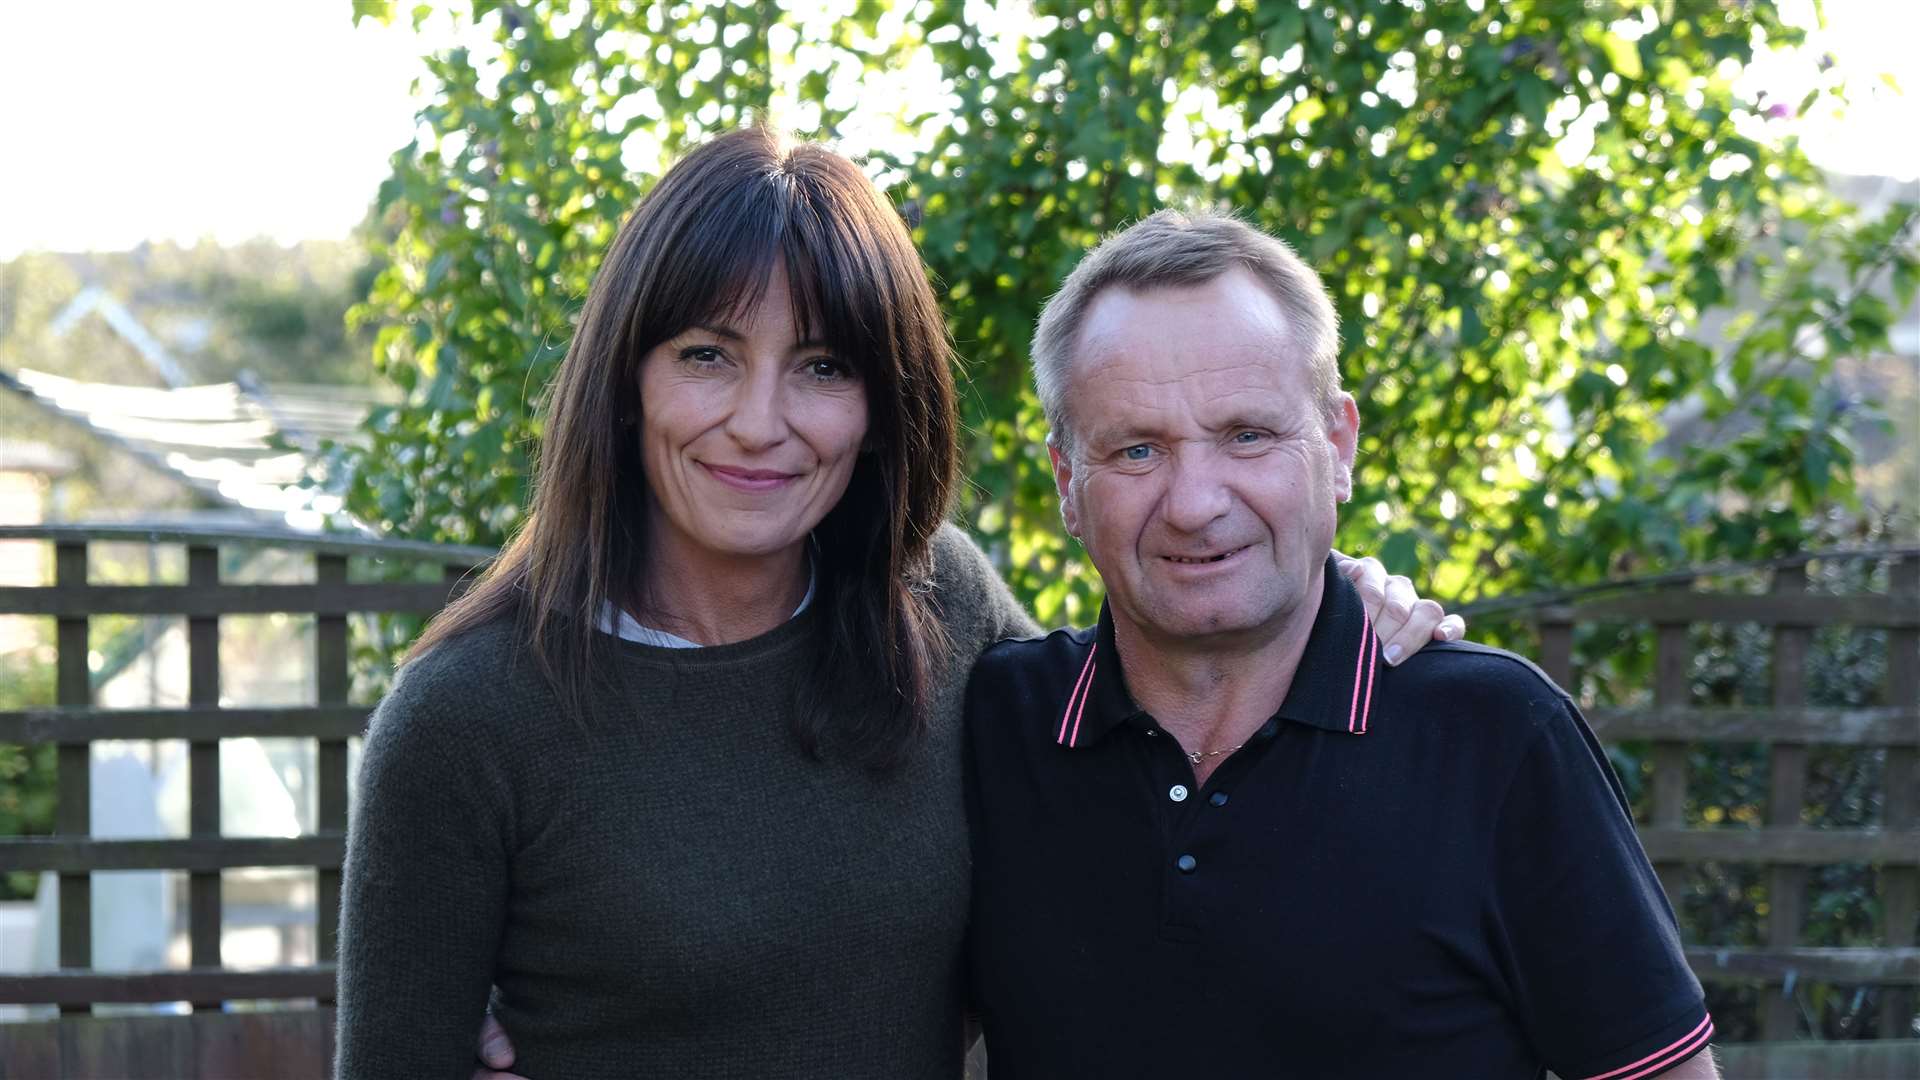 Simon meets with Long Lost Family presenter Davina McCall who tells him the news